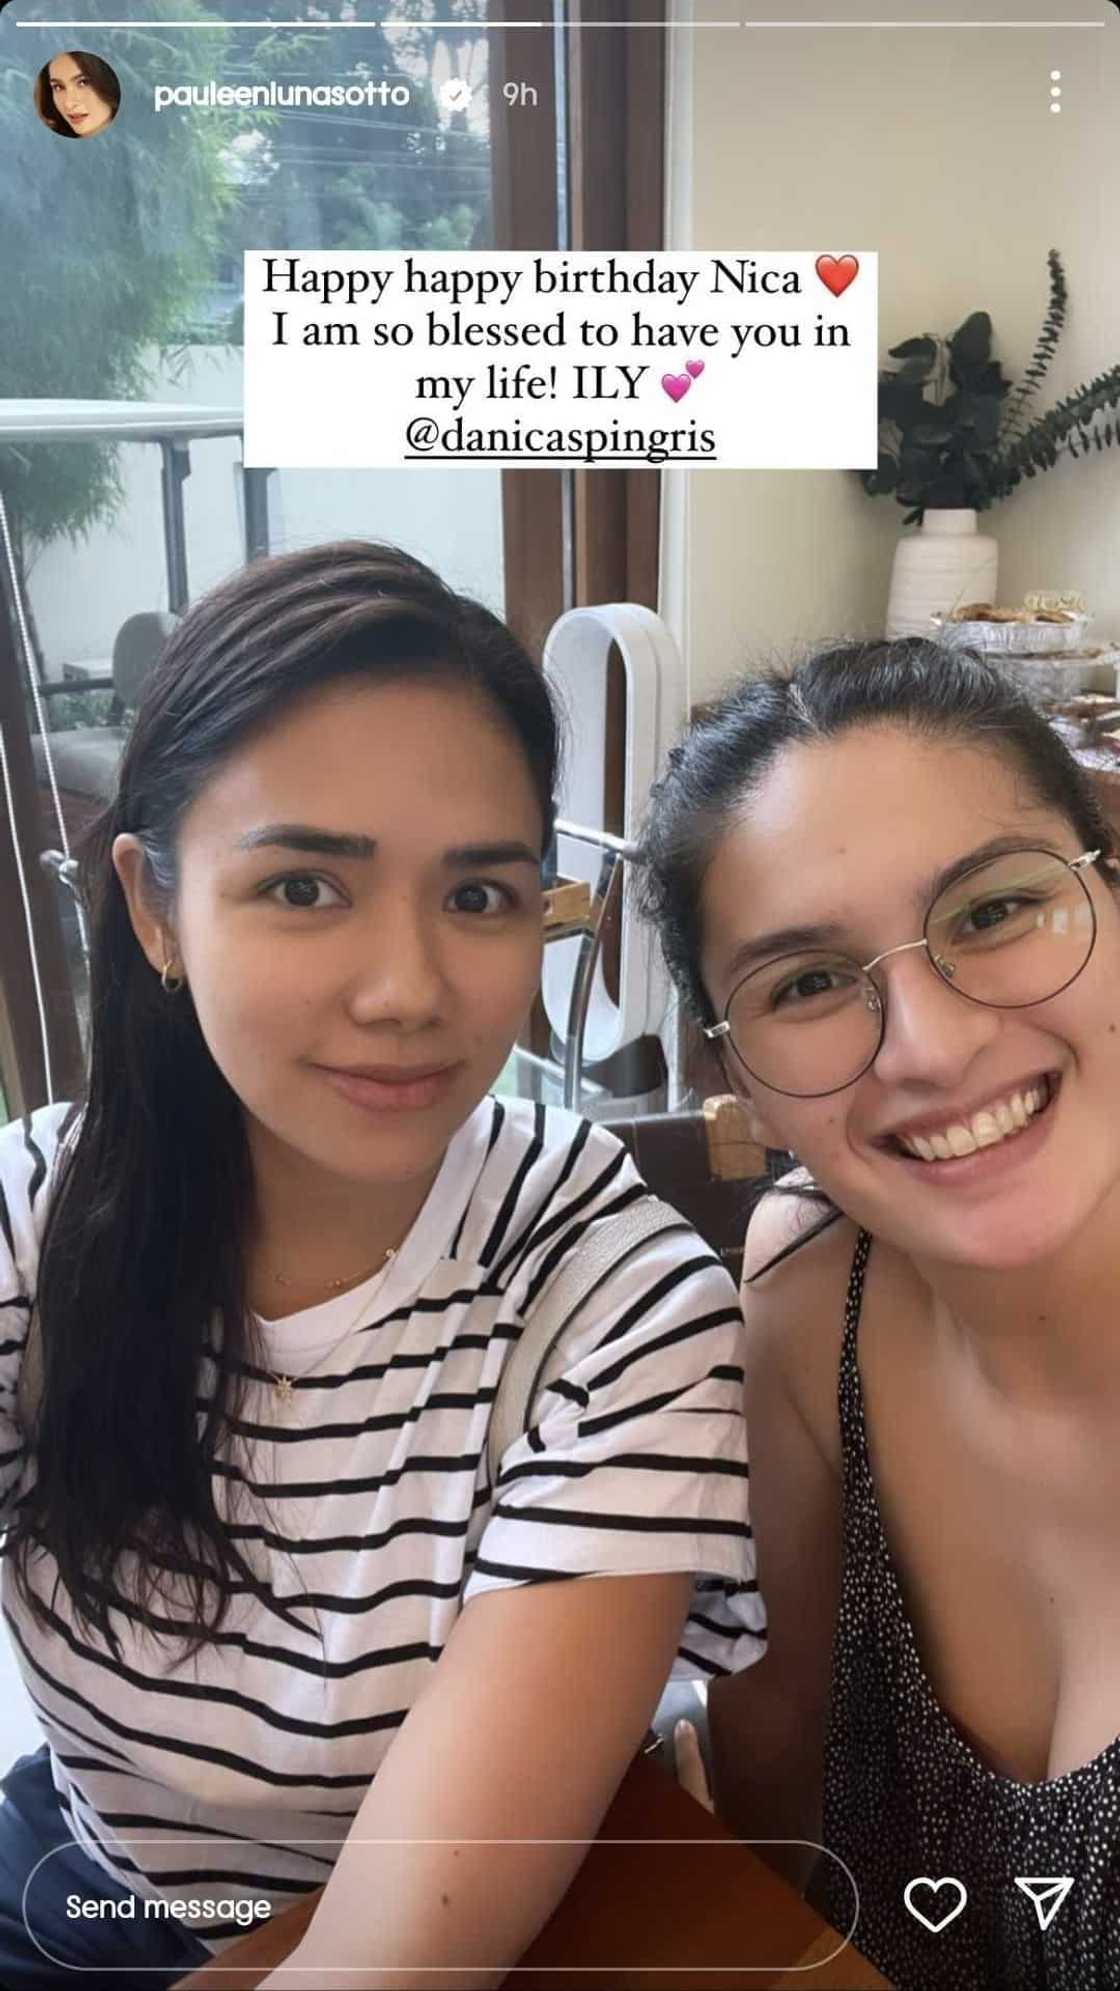 Pauleen Luna pens a sweet birthday message for her stepdaughter Danica Sotto